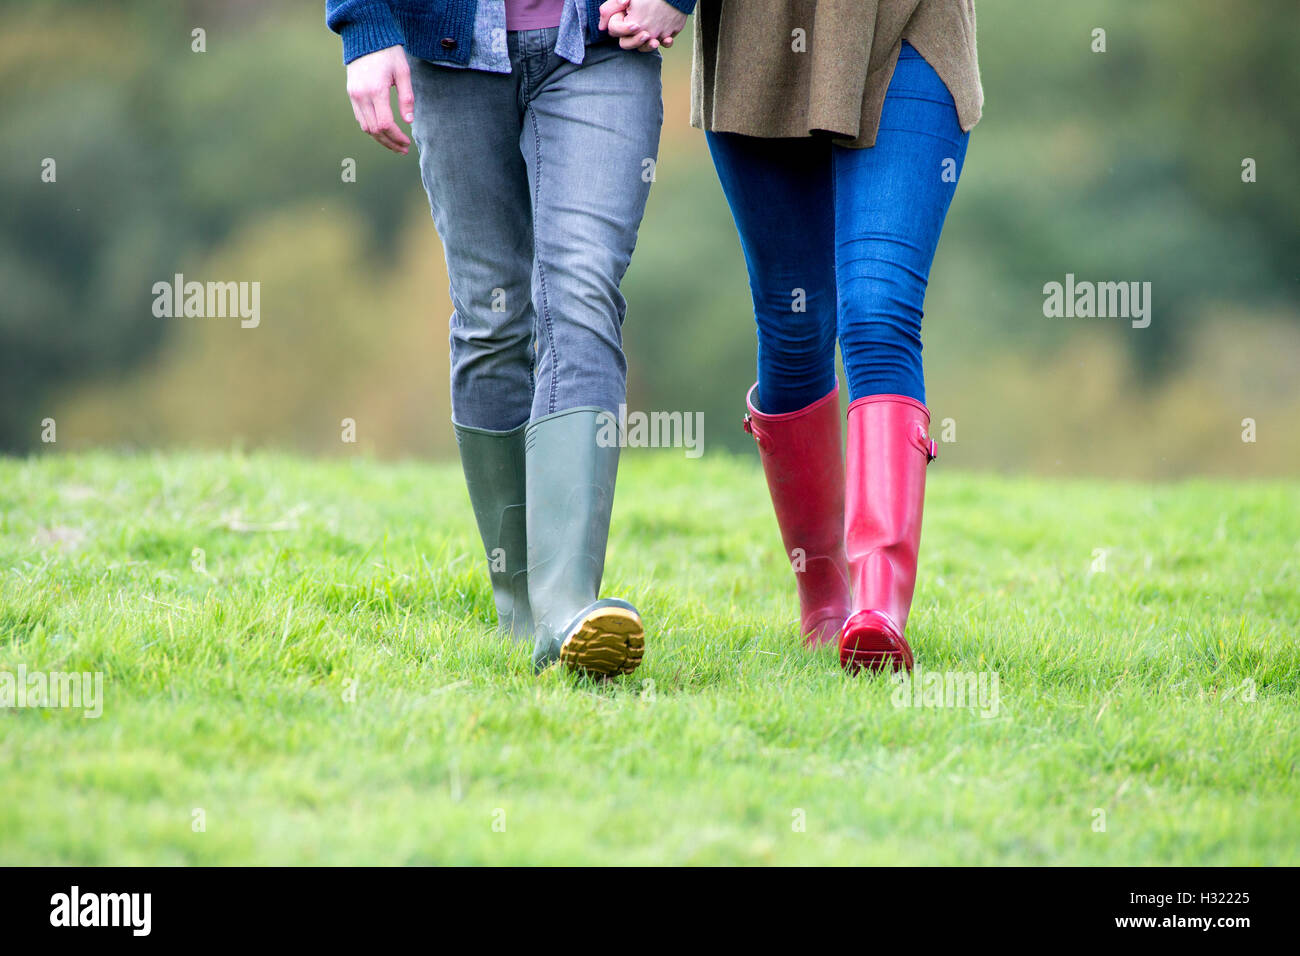 Landscape image of a young couple's legs. They are holding hands and walking through the grass in welly boots. Stock Photo